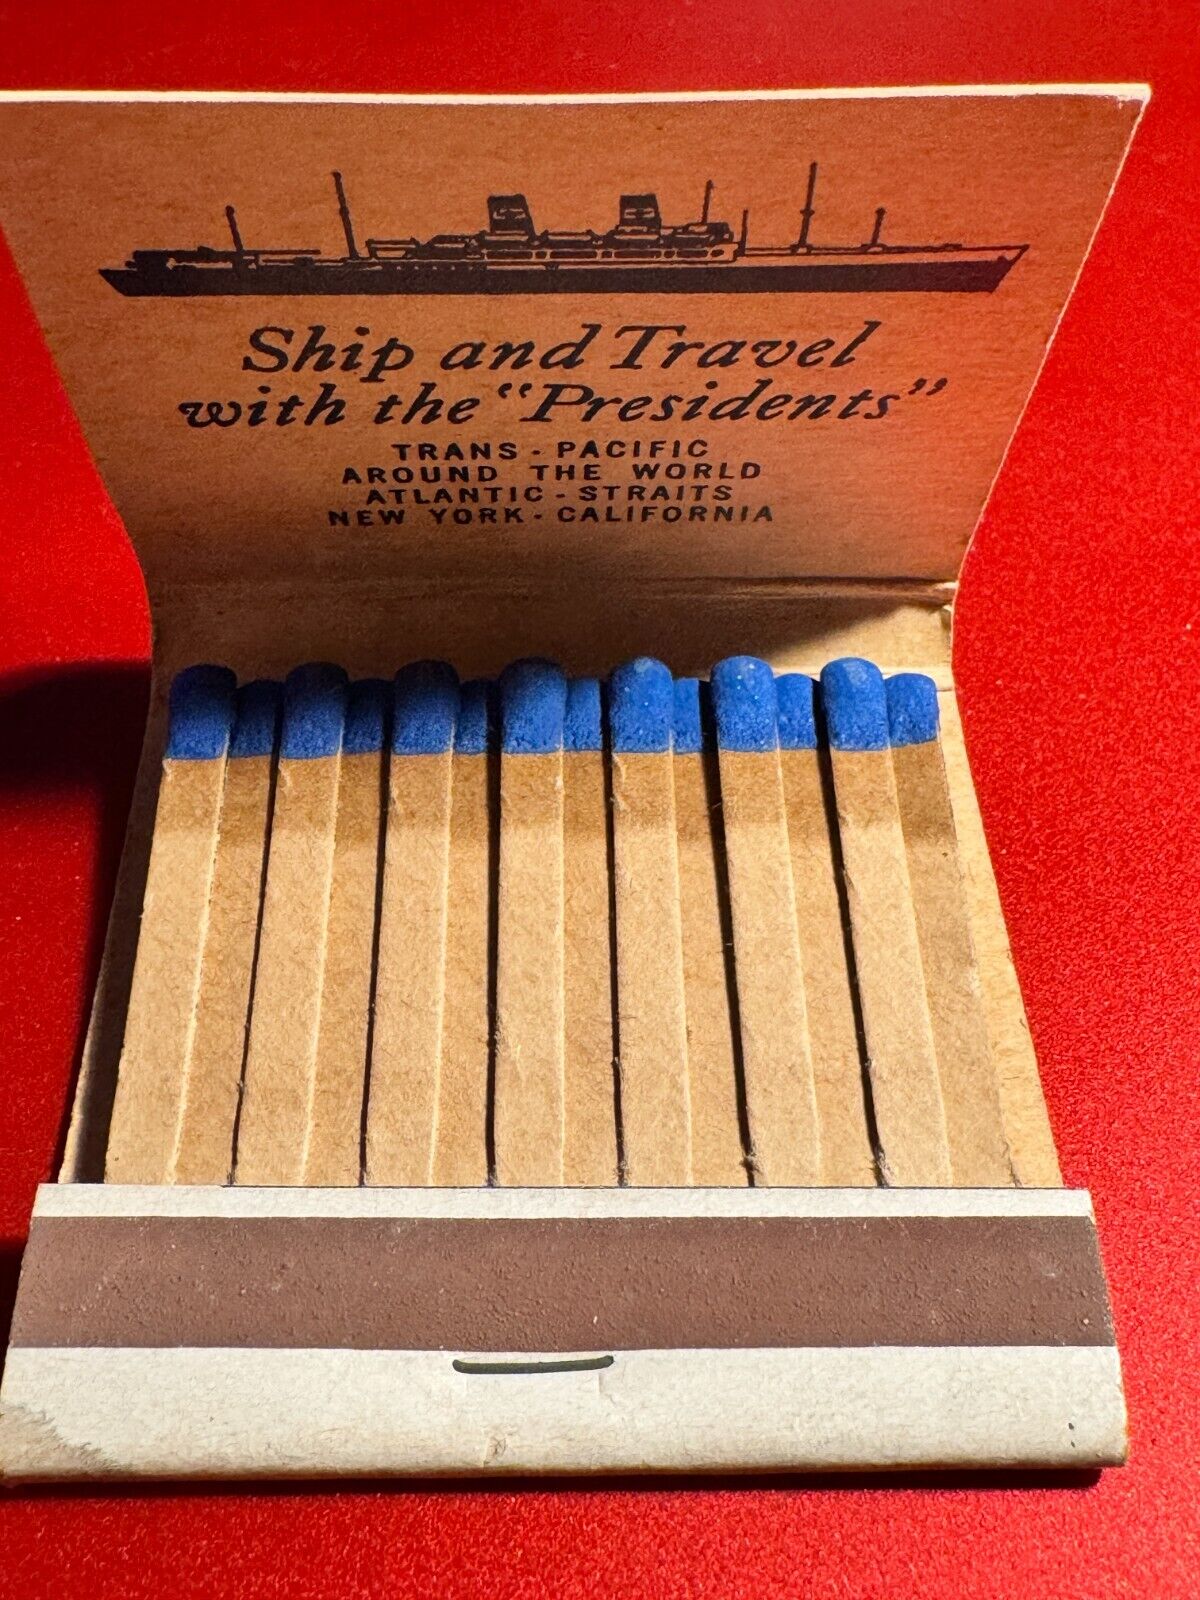 MATCHBOOK - AMERICAN PRESIDENT LINES - TRAVEL WITH PRESIDENTS - UNSTRUCK